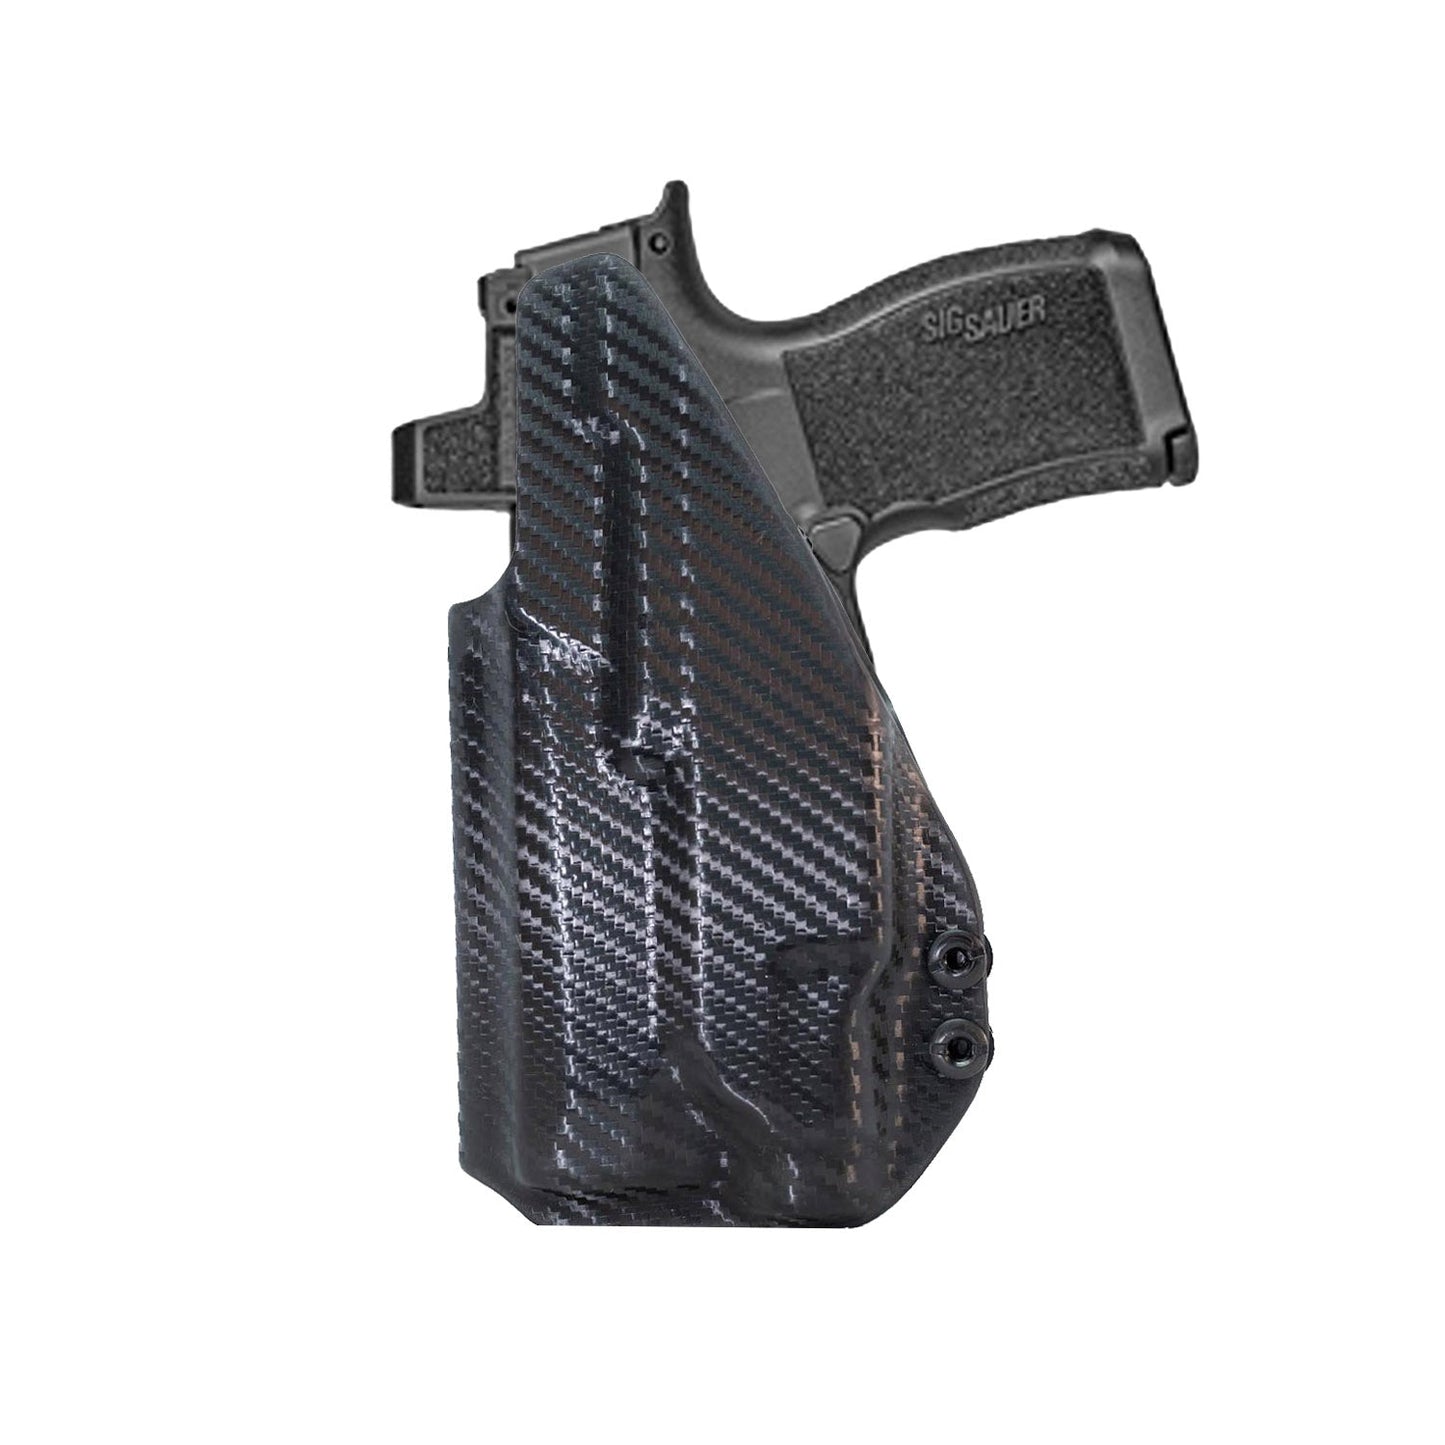 GLOCK 19/ 19X With TLR7 Light IWB (Inside The Waistband Holster)